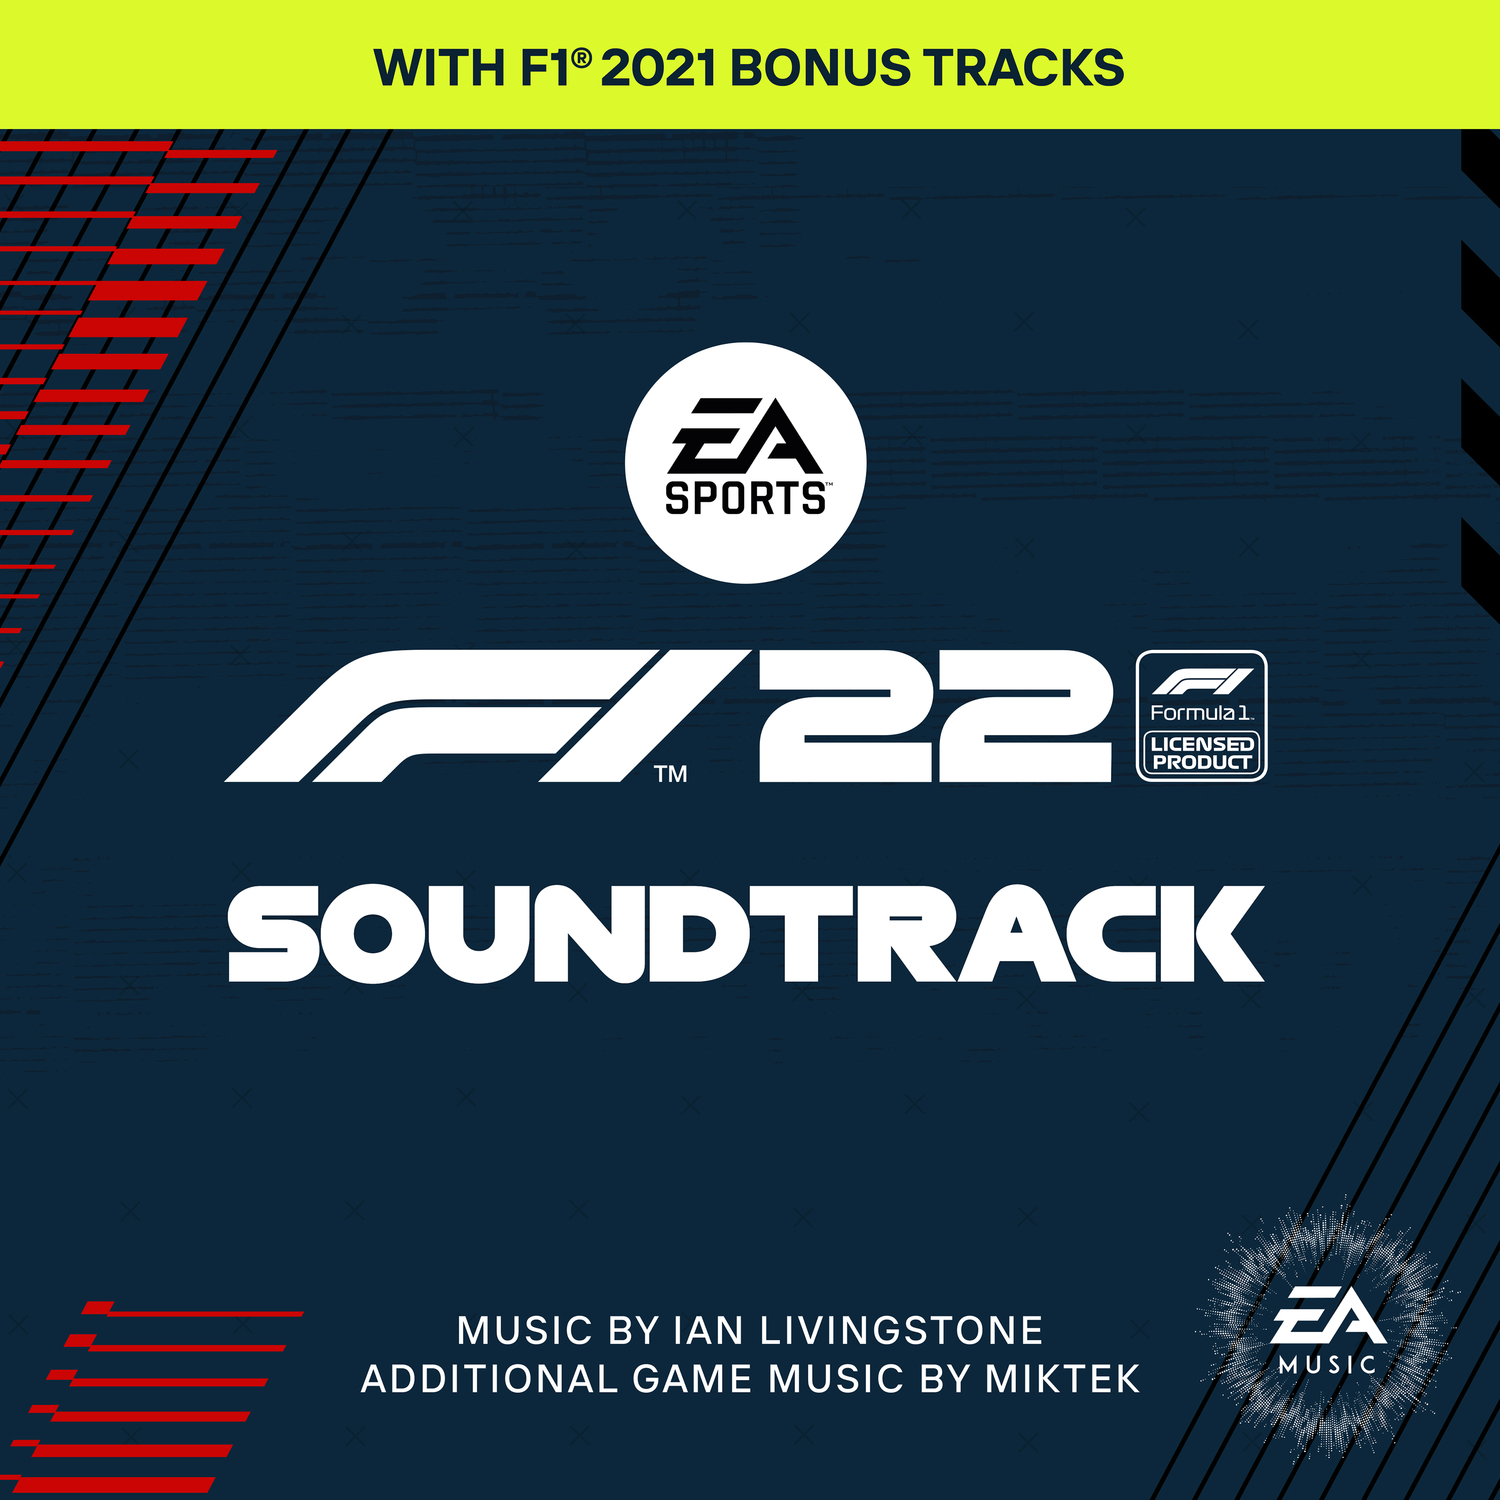 F1® 22 (2022) MP3 - Download F1® 22 (2022) Soundtracks for FREE!